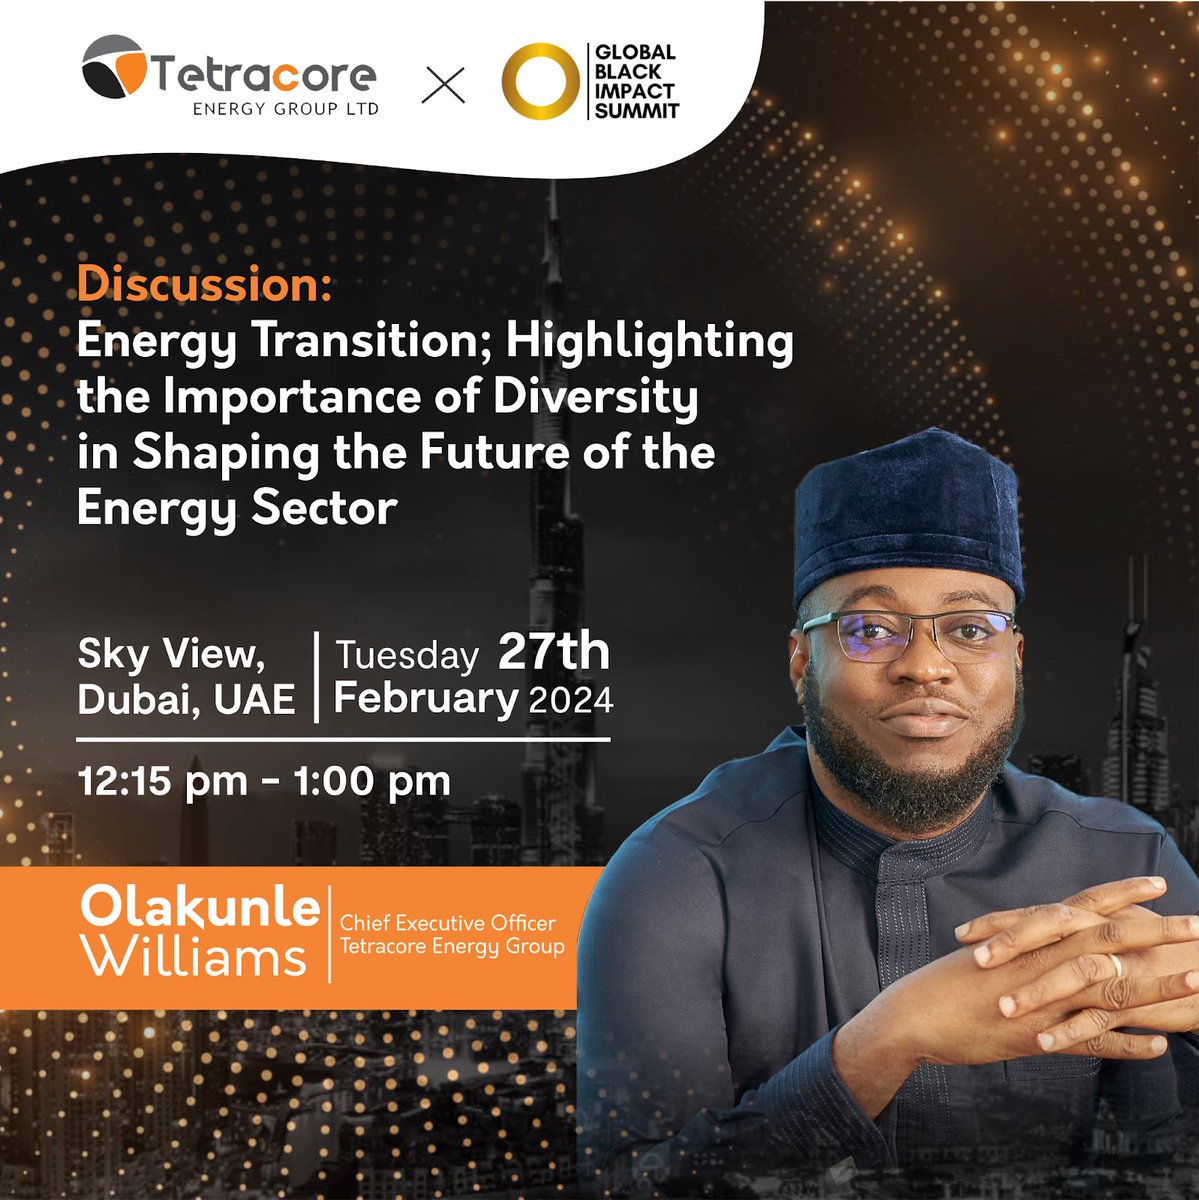 Our CEO, @OlakunleWiliams will be in a panel discussion at the @BlackImpactS 2024, discussing Energy Transition and highlighting the Importance of Diversity in Shaping the Future of the Energy Sector in Dubai. 

#TetracoreEnergyGroup #GBIS2024 #Tetracore